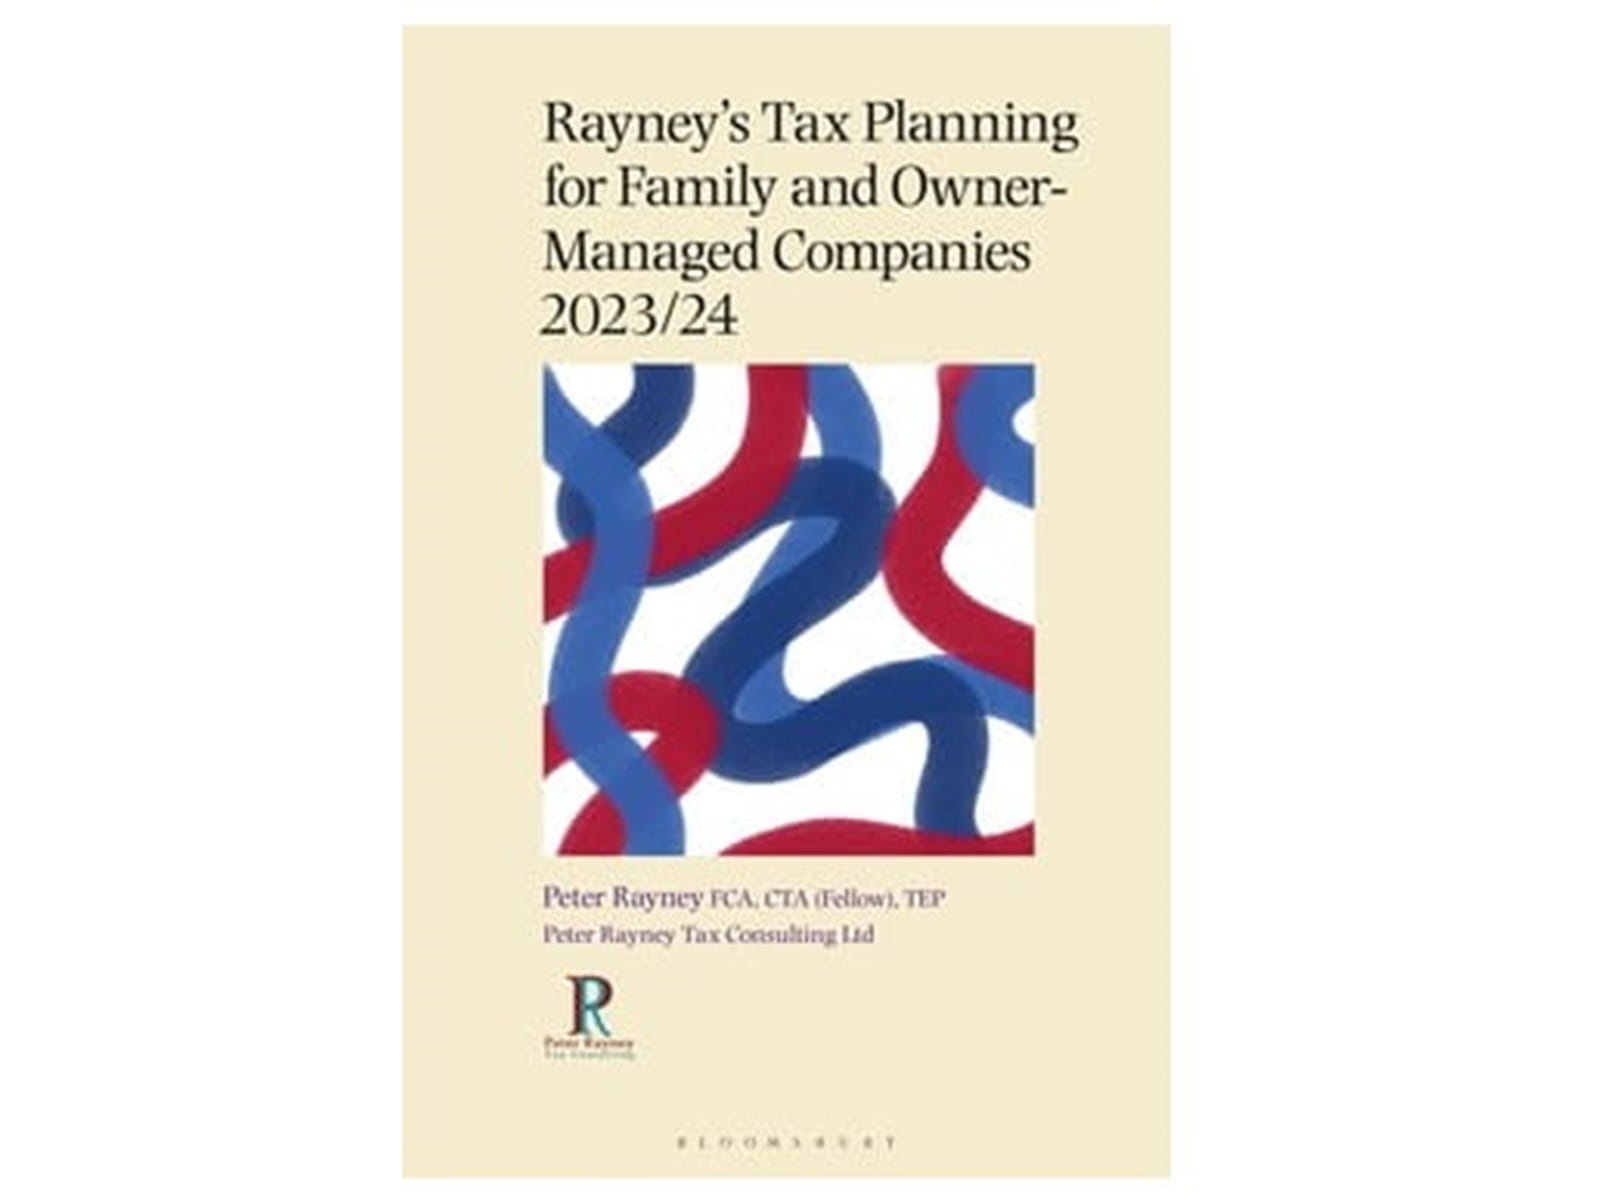 Tax Planning for Family and Owner-Managed Companies 2023/24 book cover